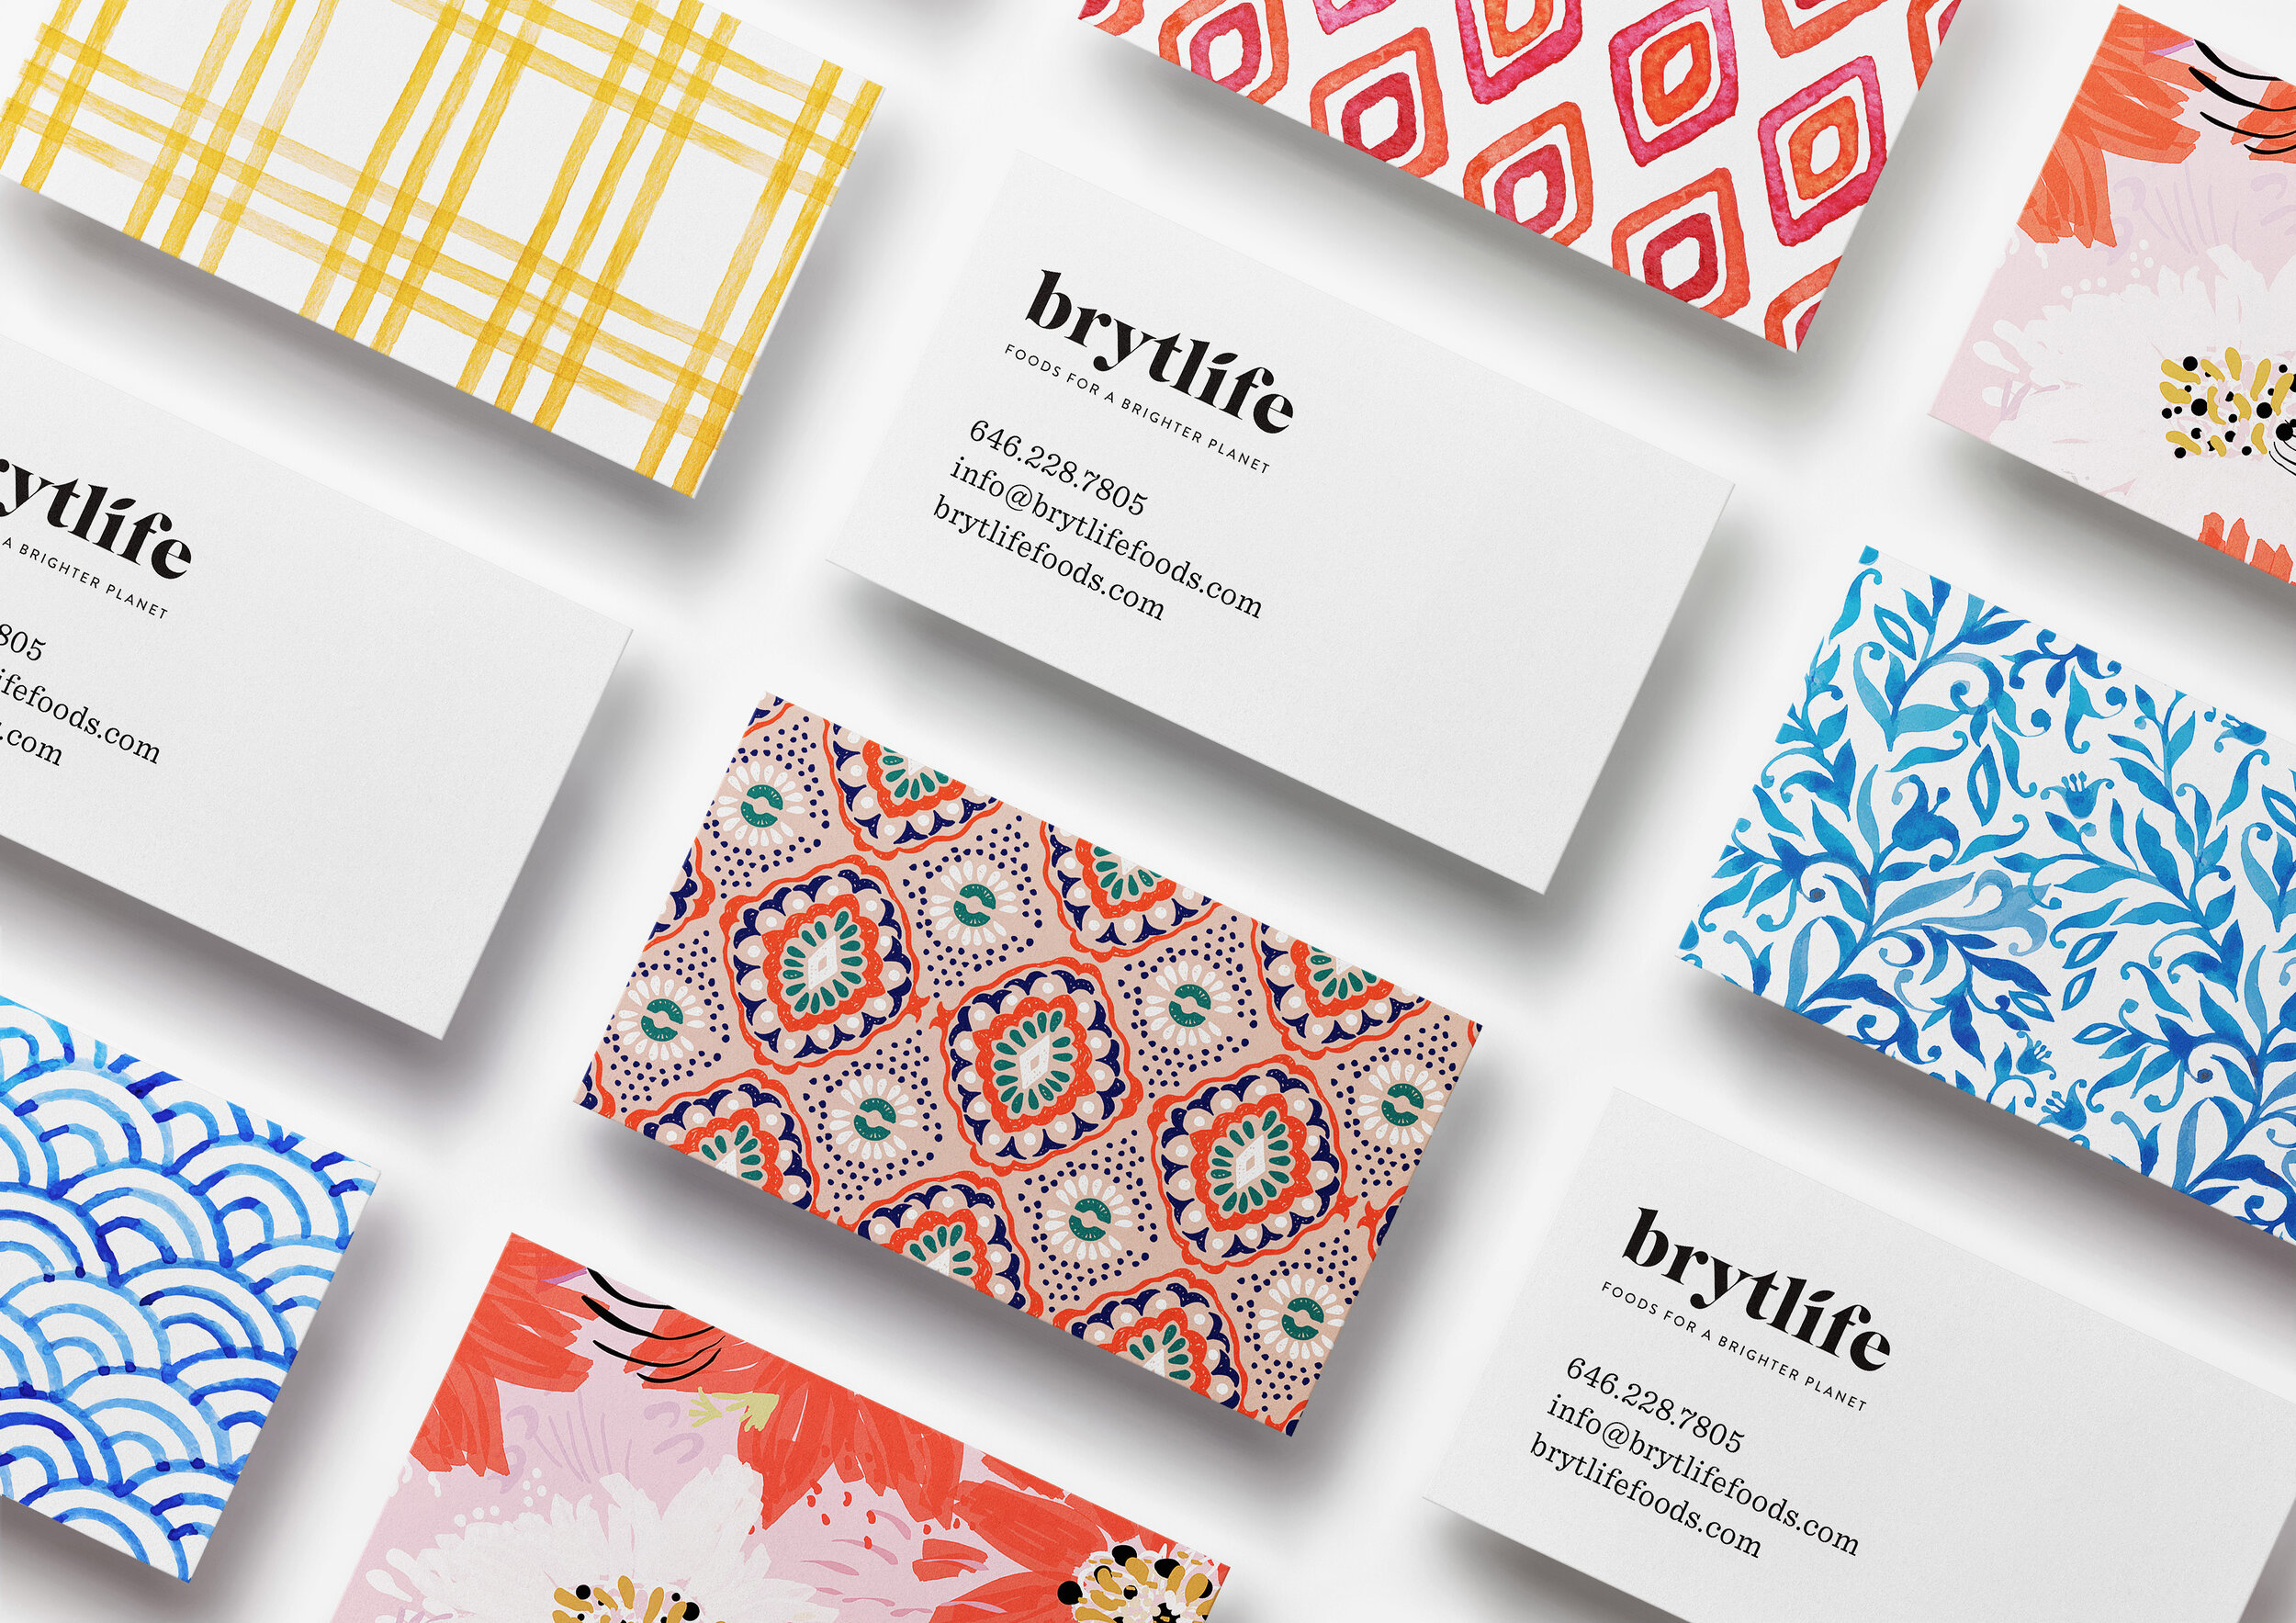 Brytlife Vegan Foods Patterned Business Card Design by The Artful Union